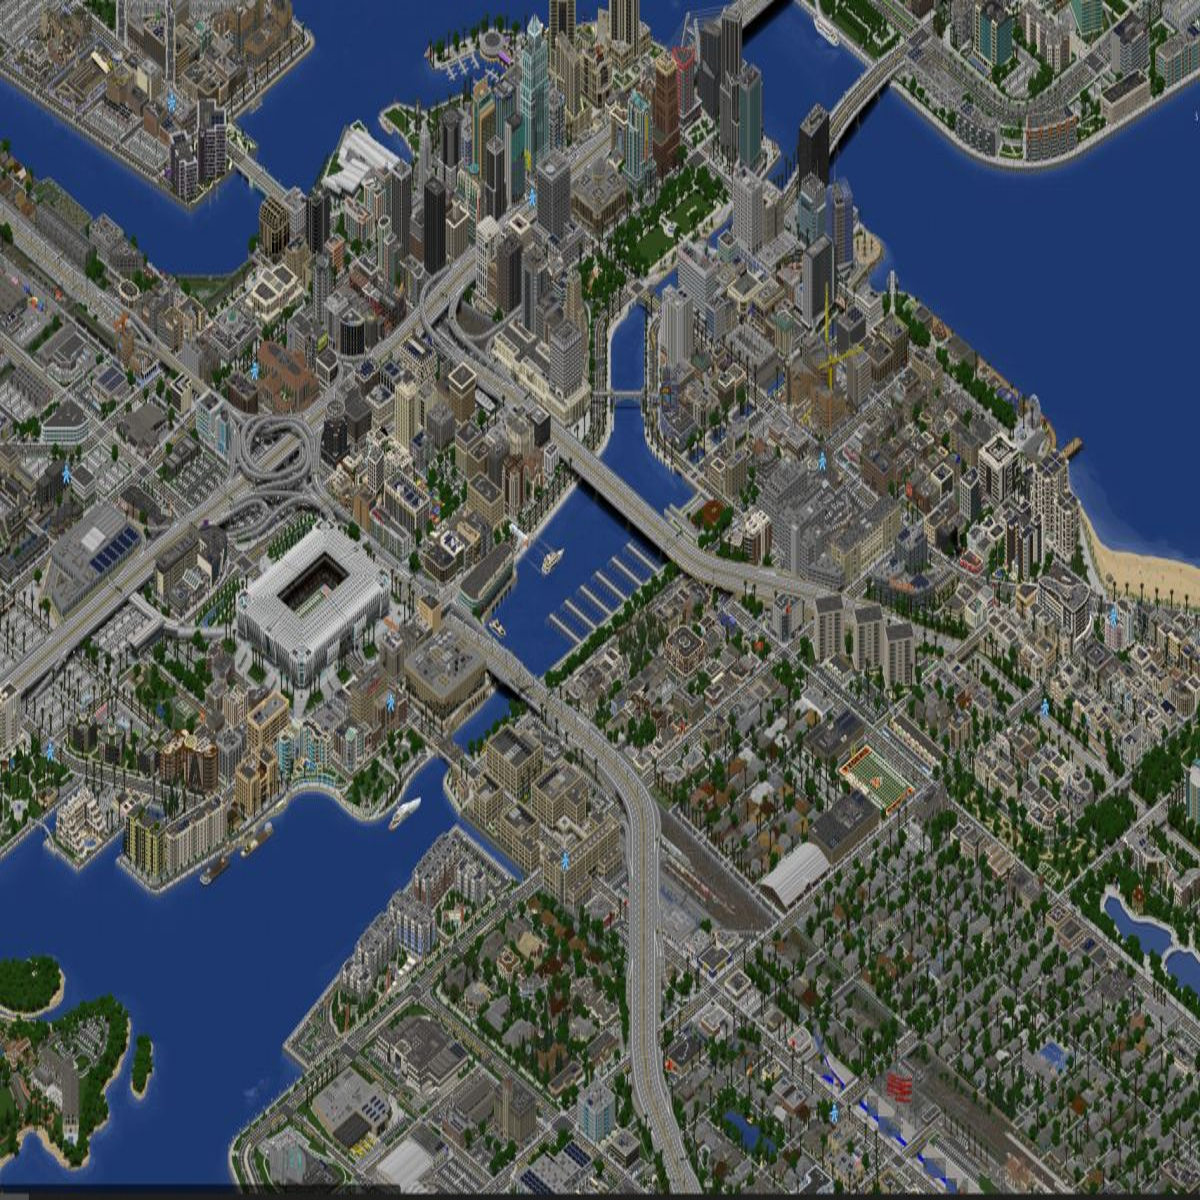 build a structure from google maps or via image in minecraft